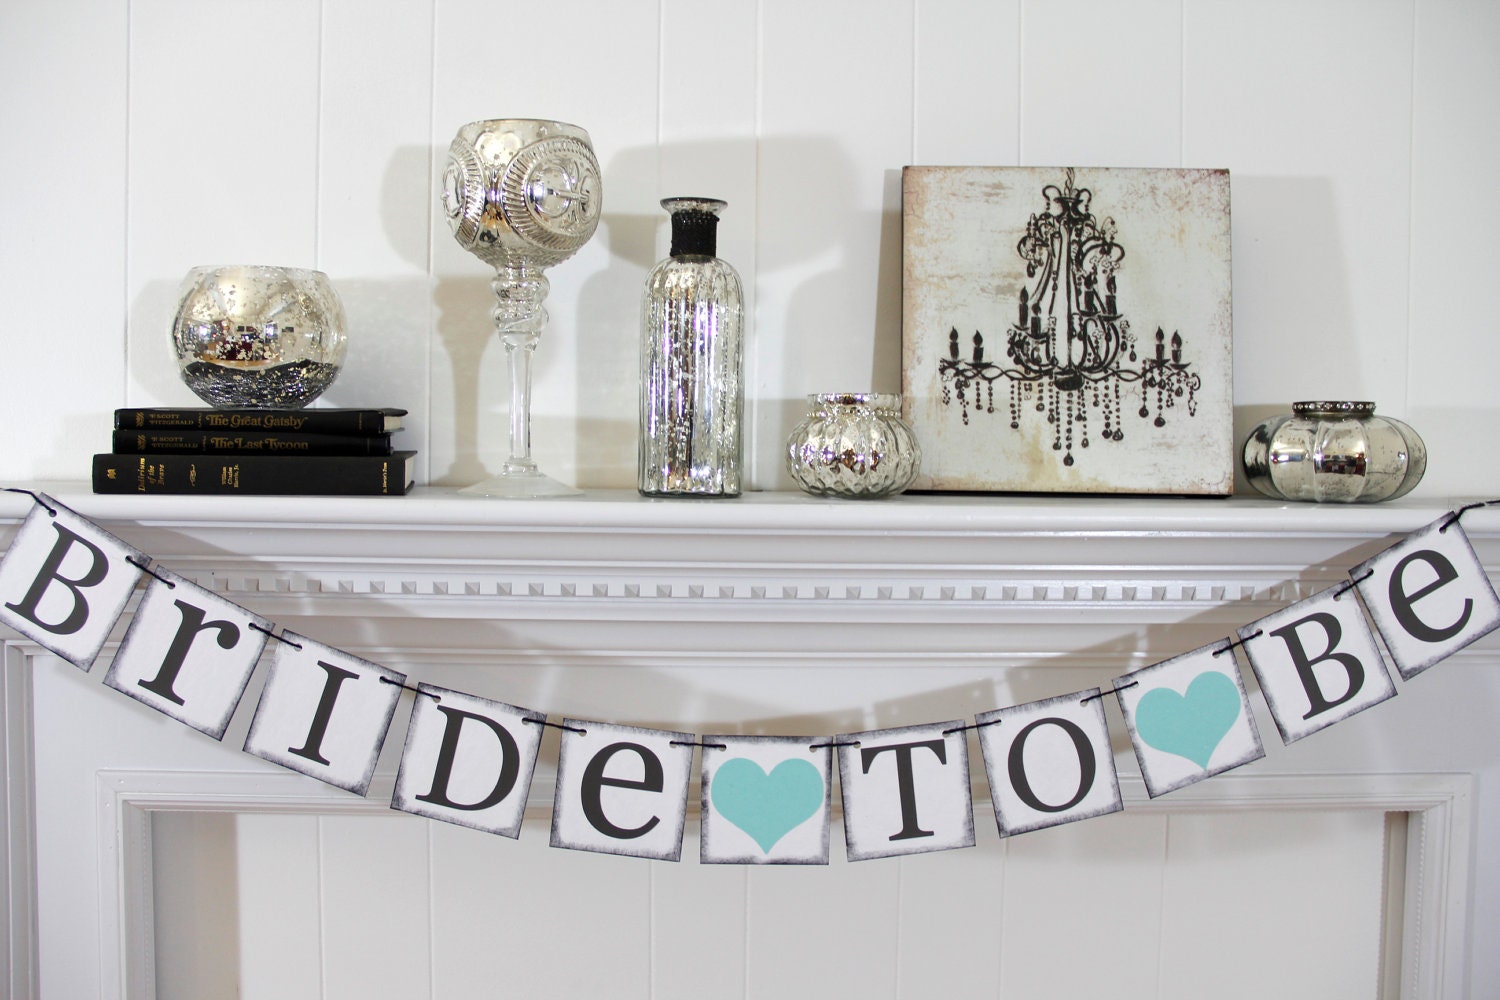 bride-to-be-banner-bridal-shower-decorations-bridal-shower-banners